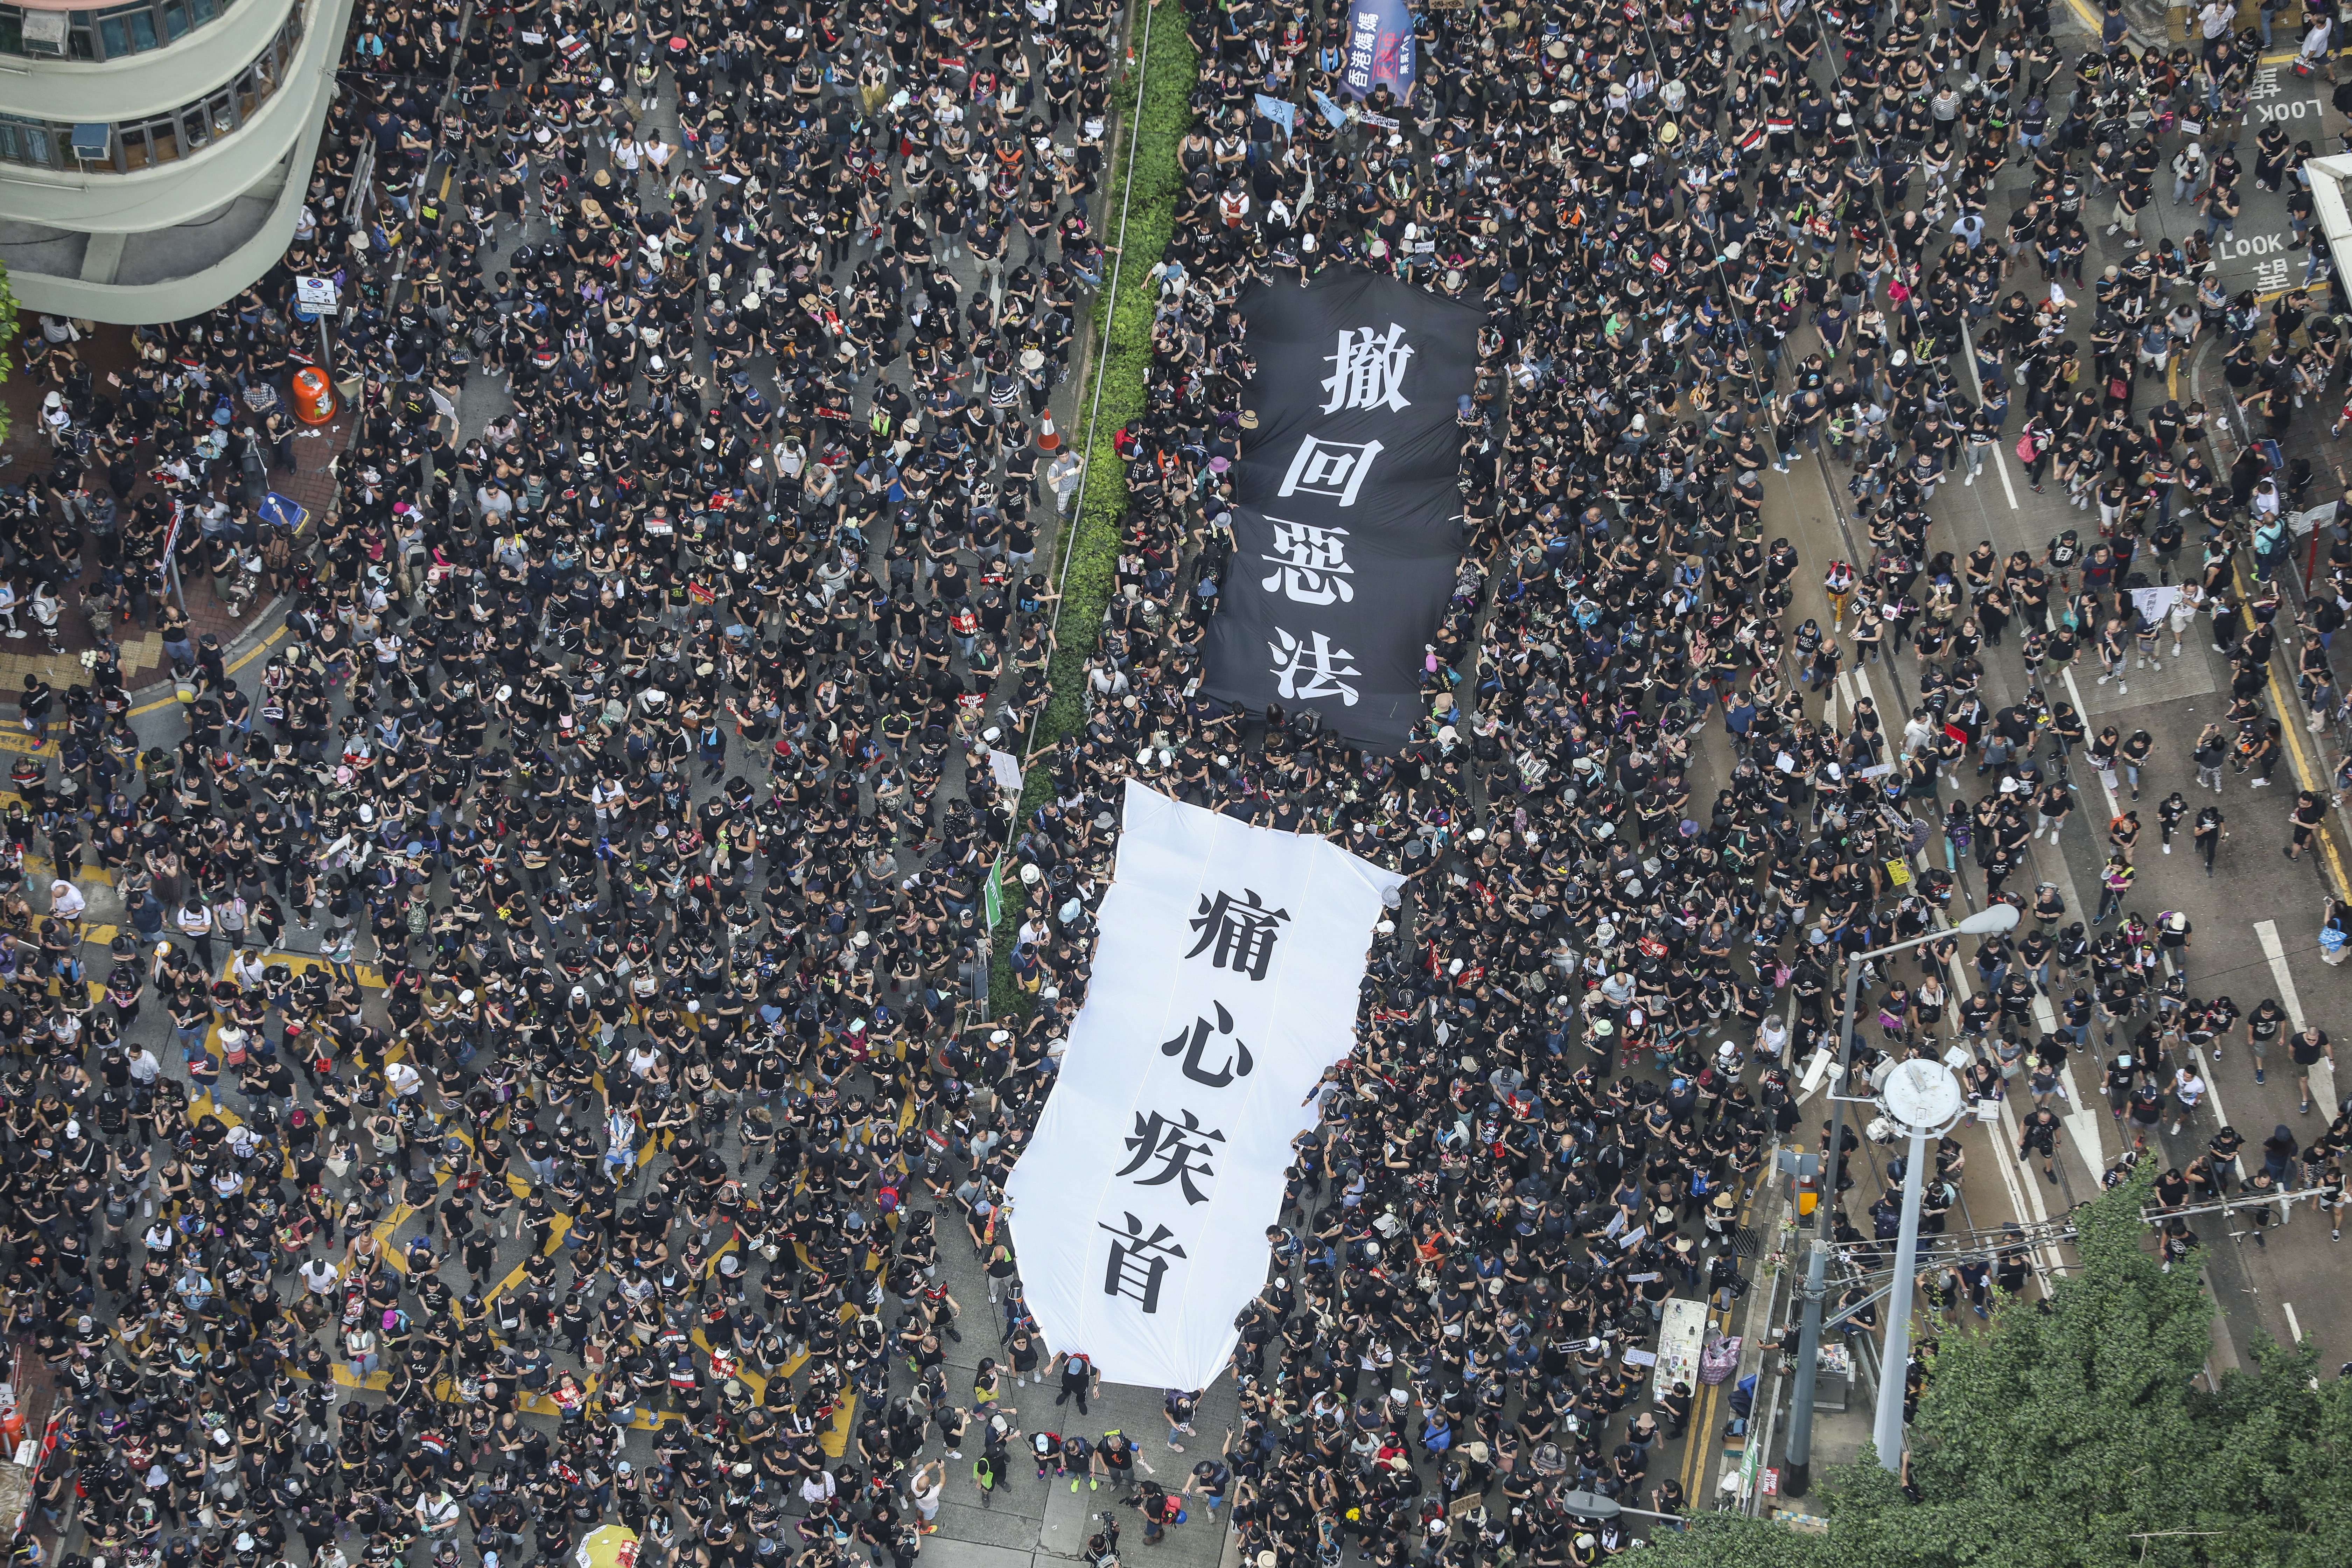 Around 2 million protesters, according to organisers, took to the streets against the extradition bill on June 16. Photo: Robert Ng